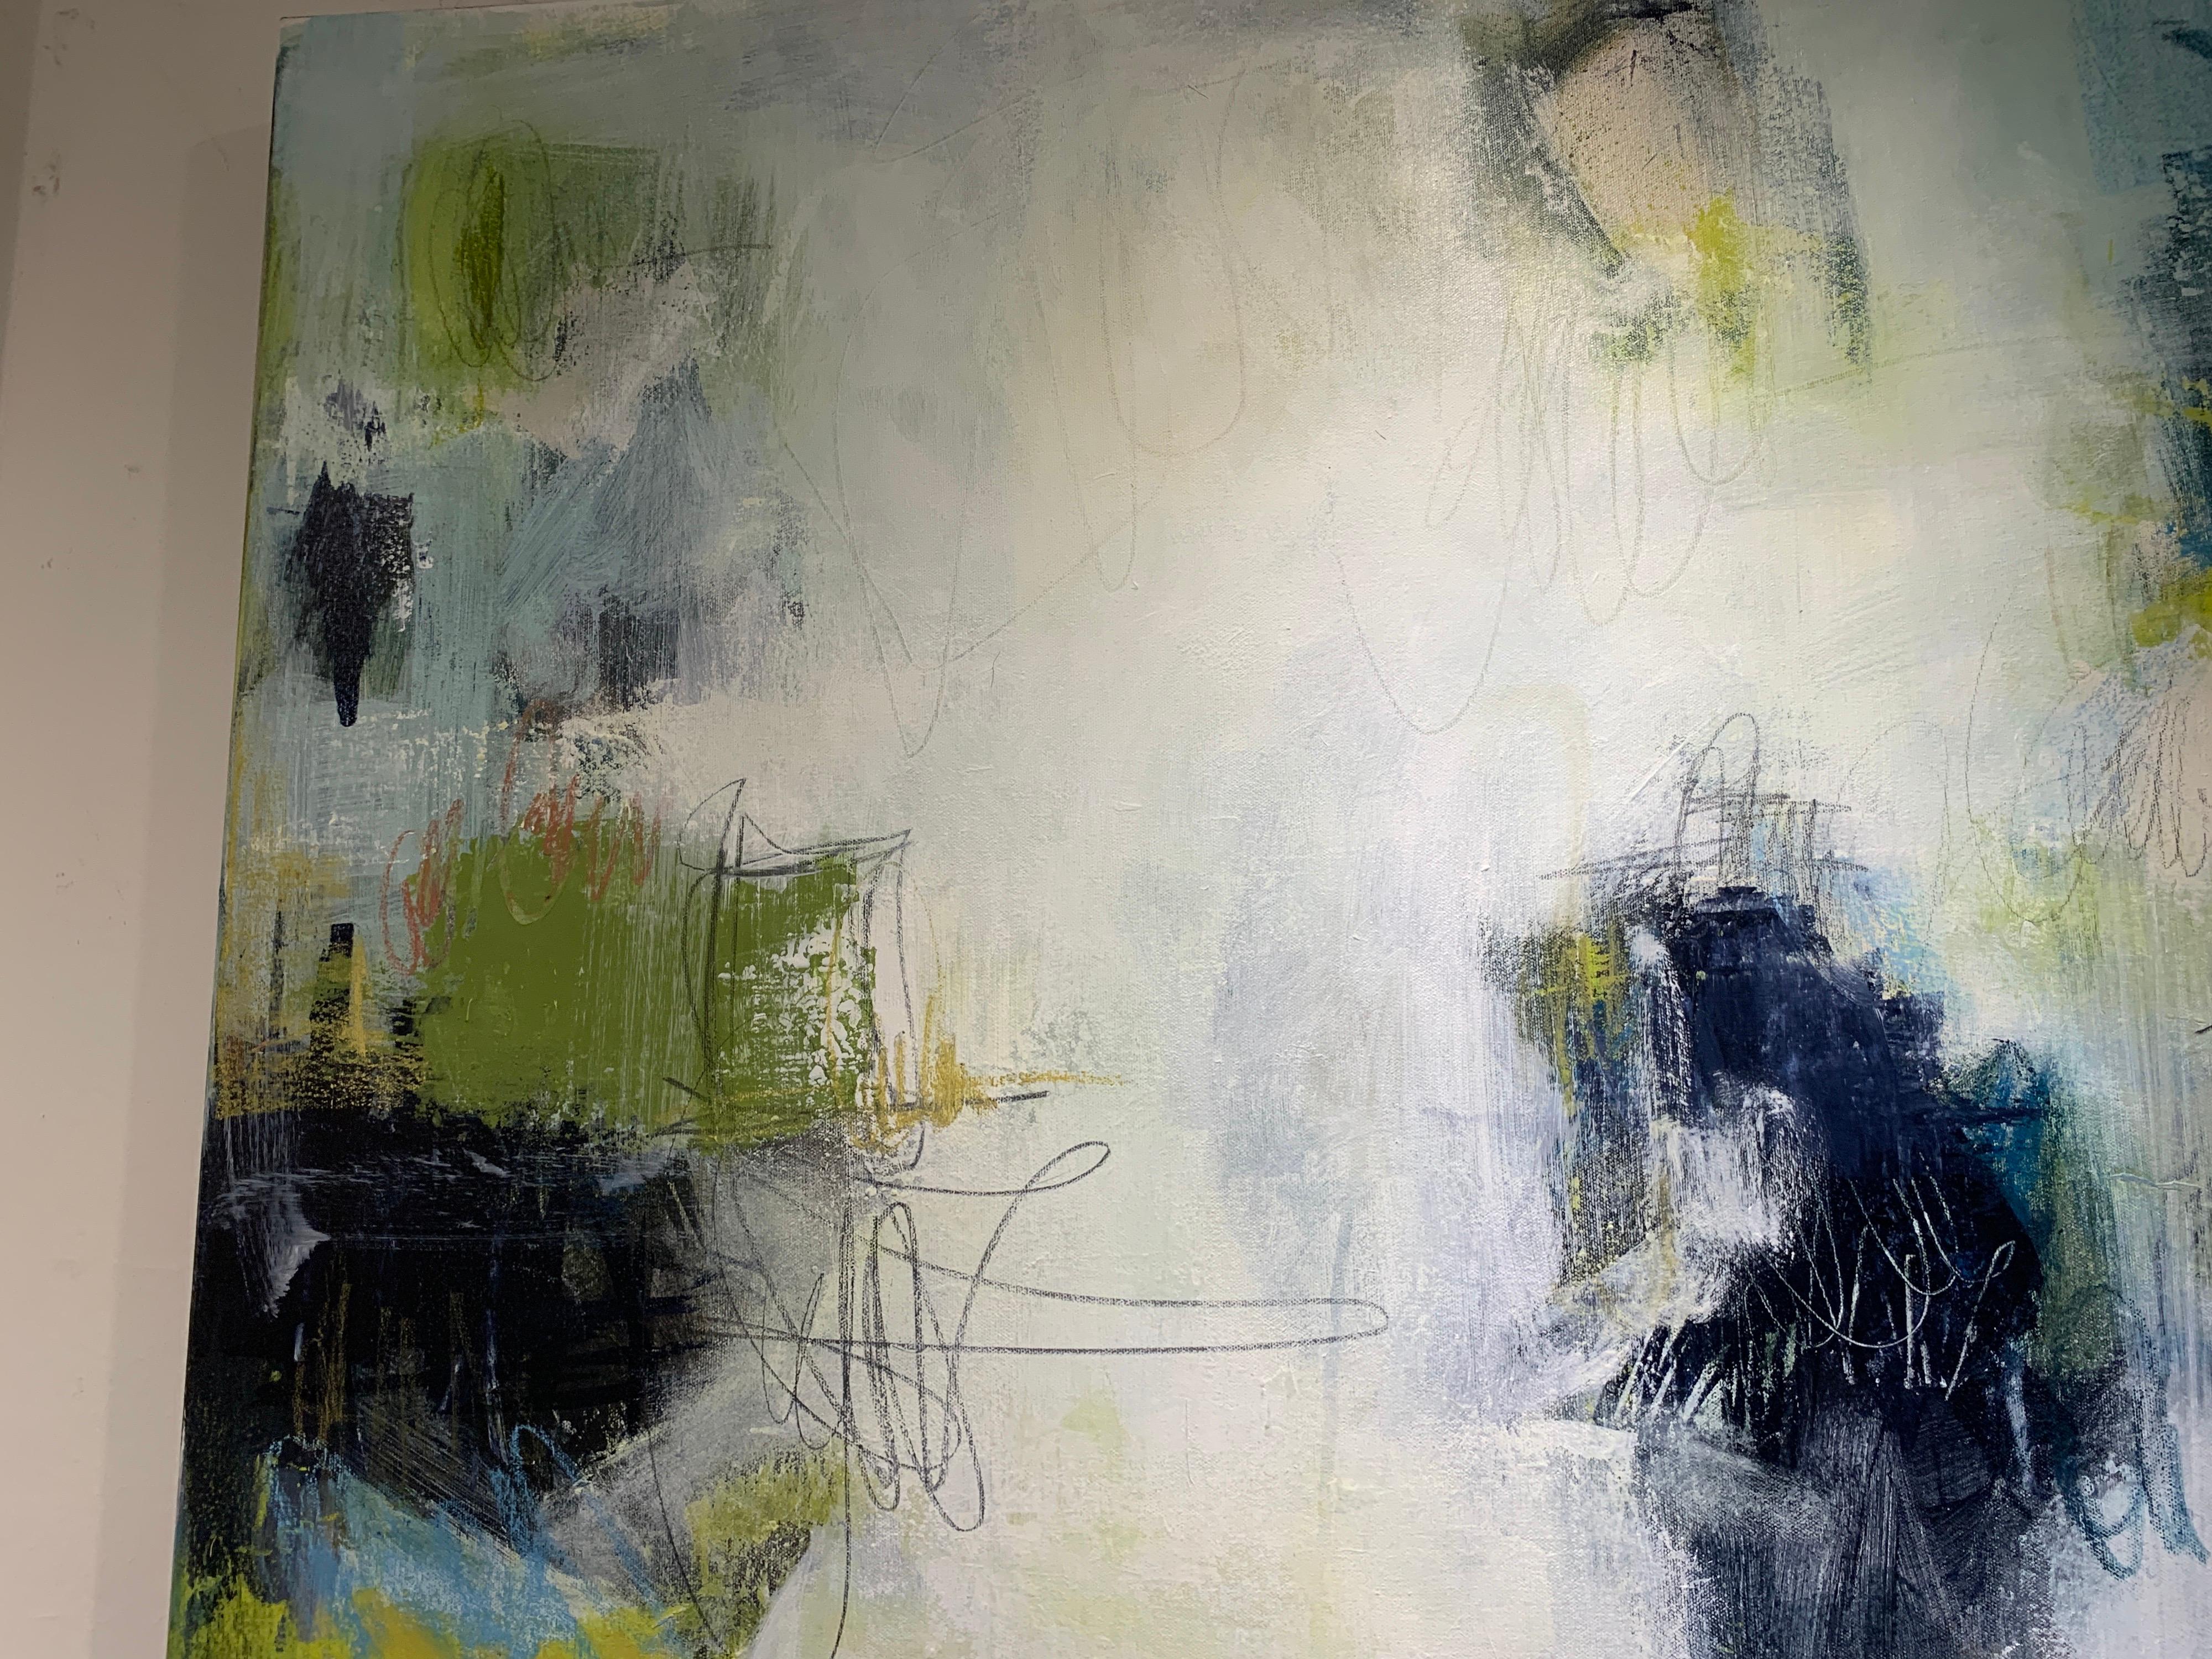 Talk Around Town by Lily Harrington, Large Abstract Painting on Canvas 4